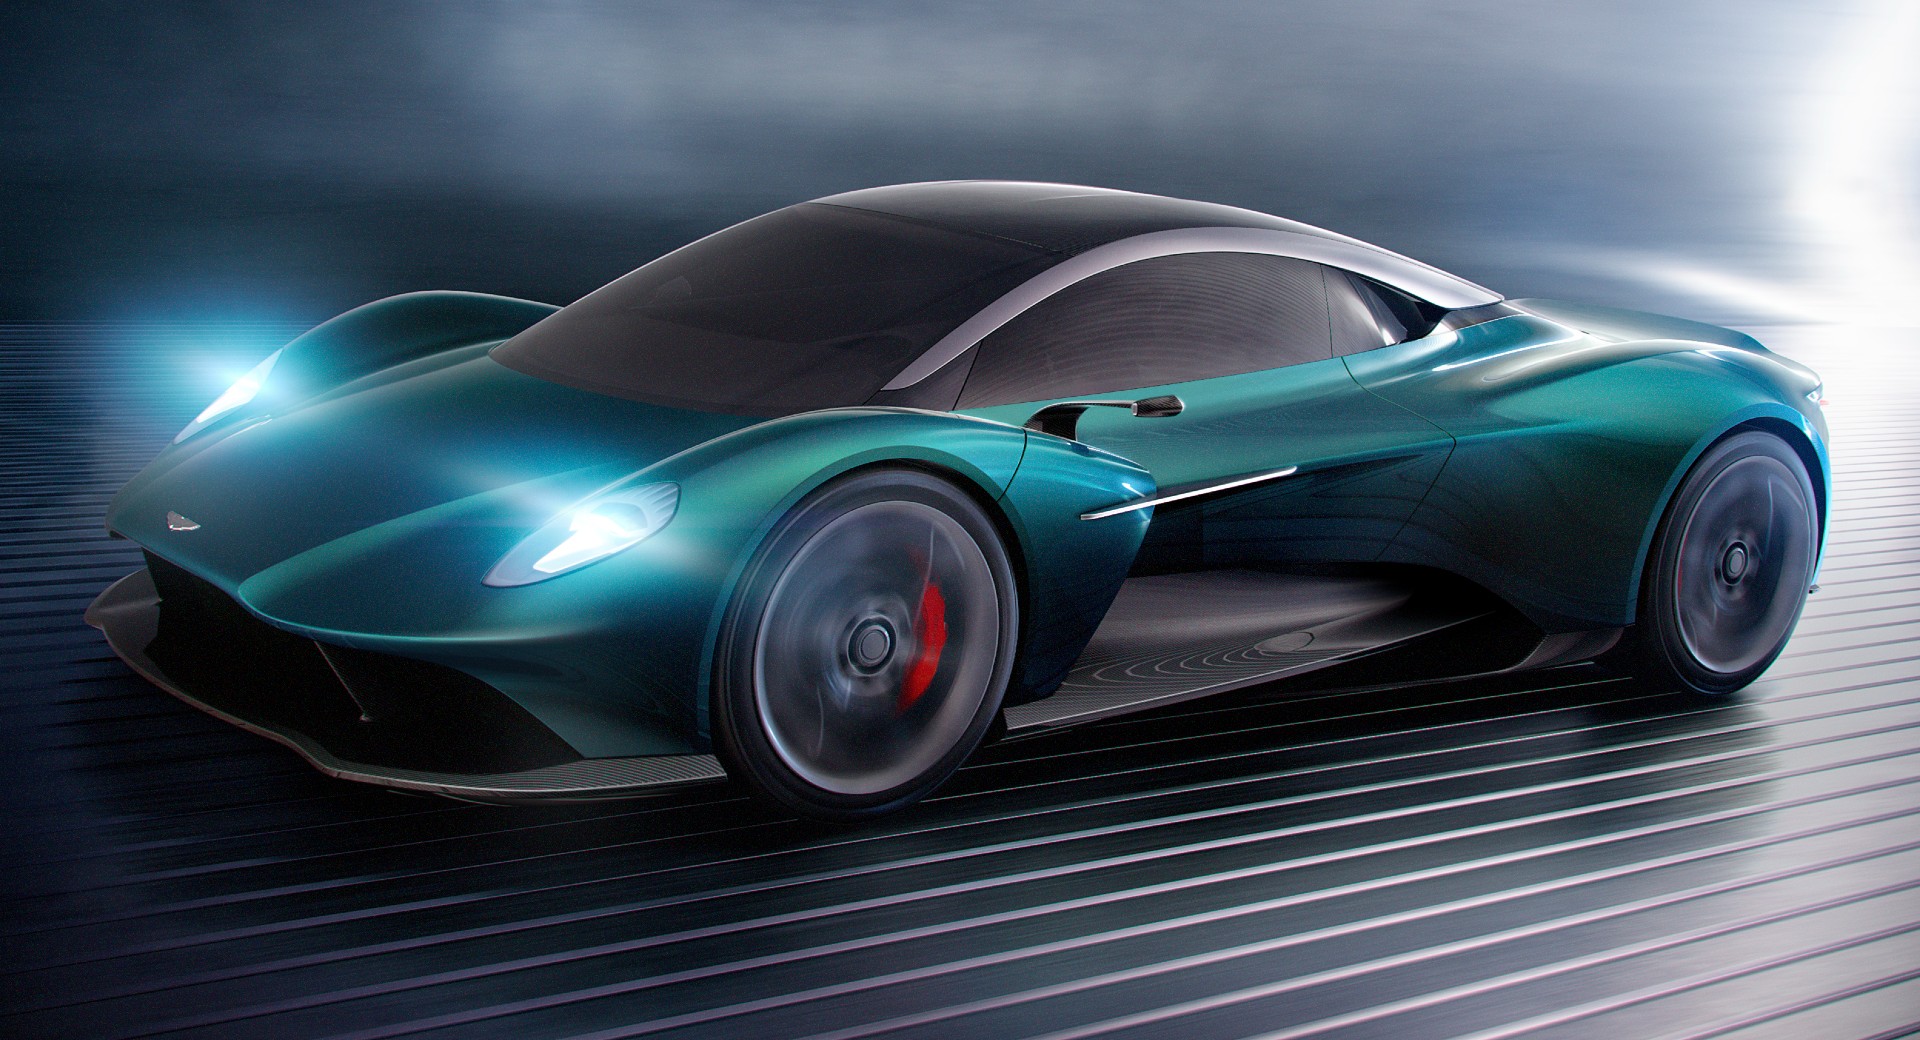 Entry Level Aston Martin Supercar To Be Fitted With An Electrified V8